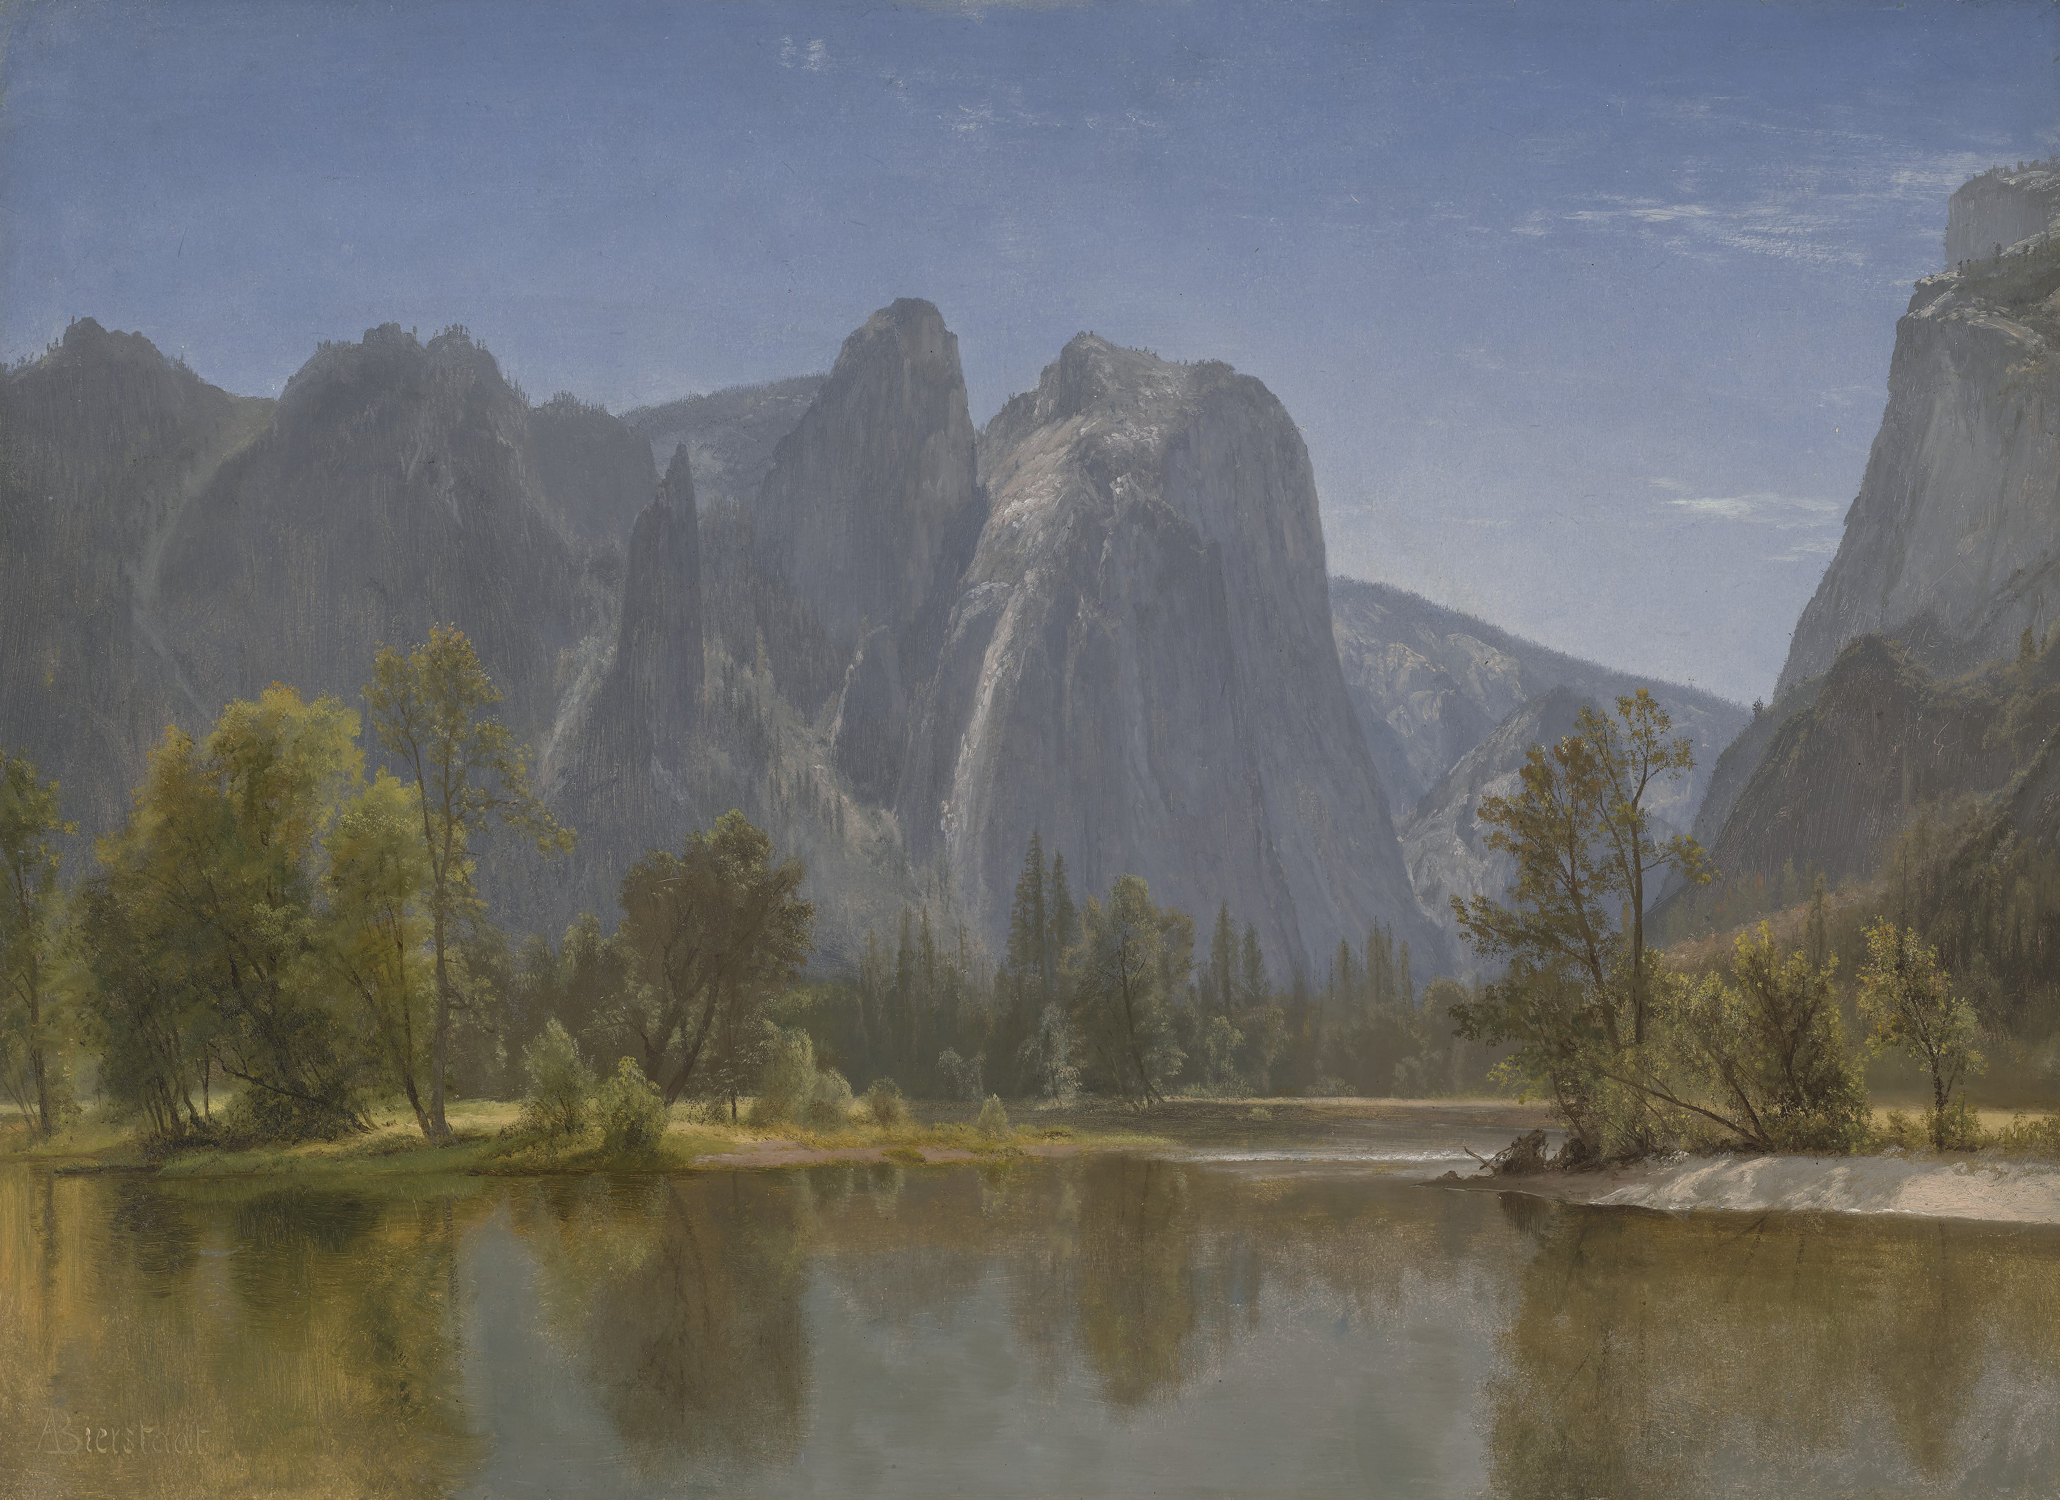 a landscape with water and mountains - Albert Bierstadt’s In the Yosemite - American Art